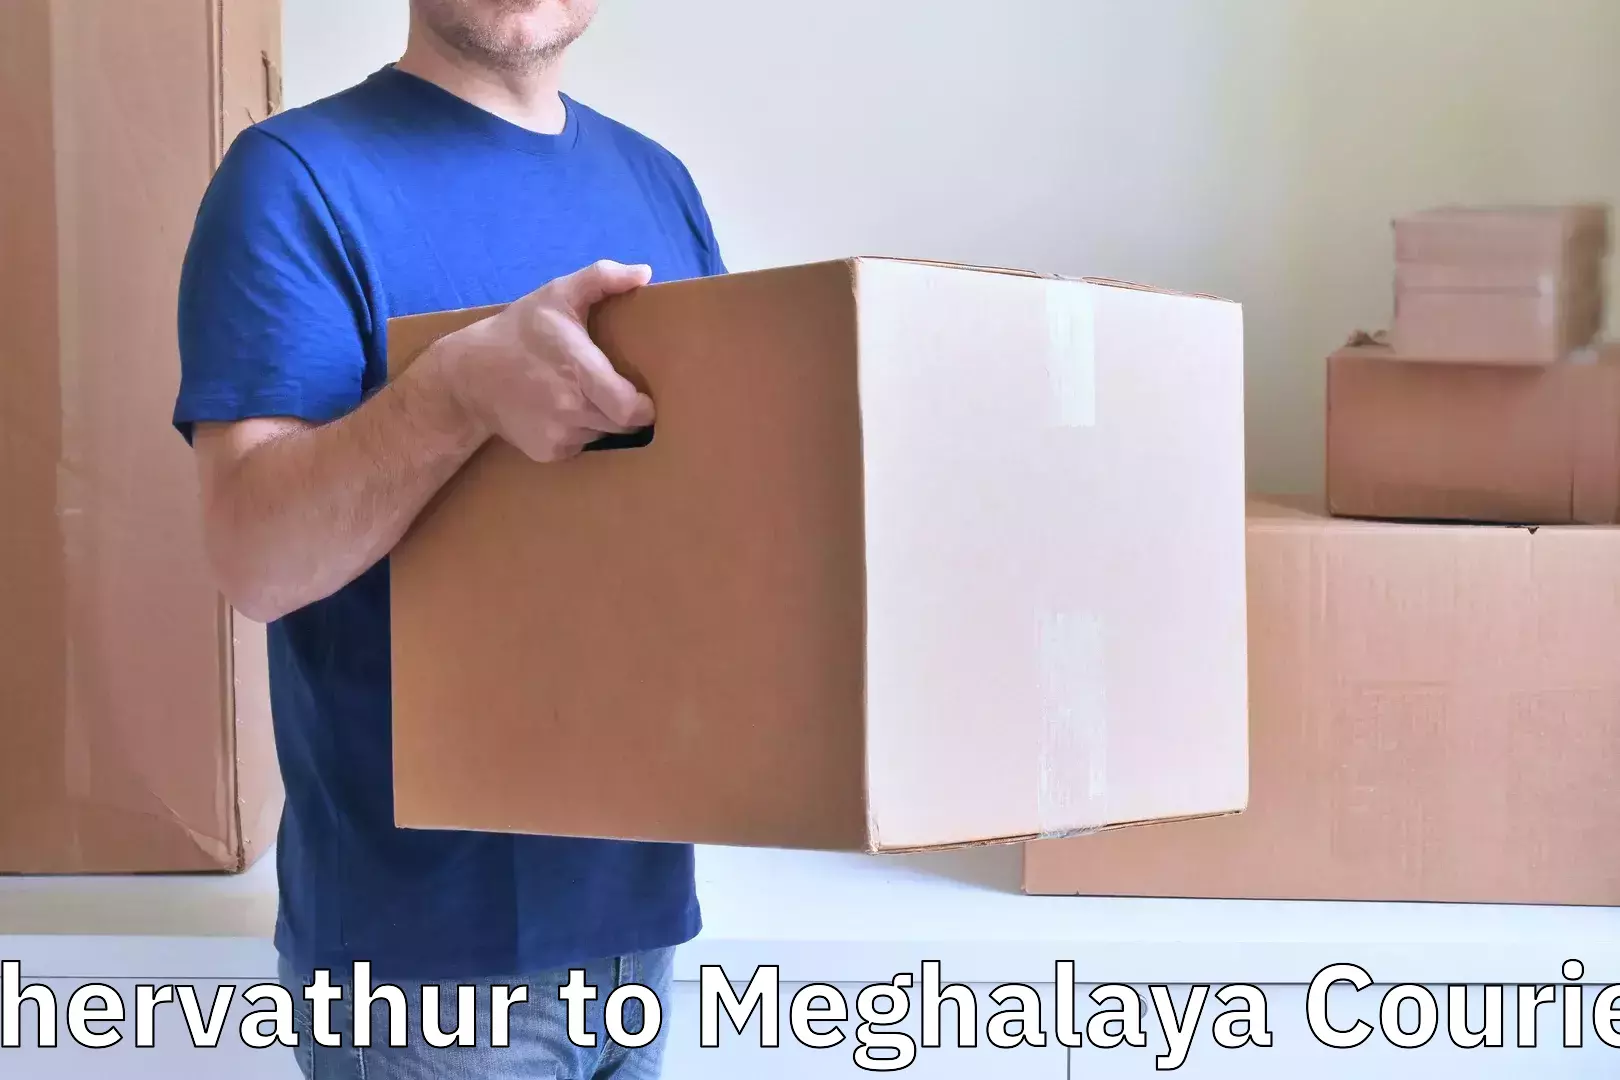 Luggage shipment specialists Chervathur to Umsaw